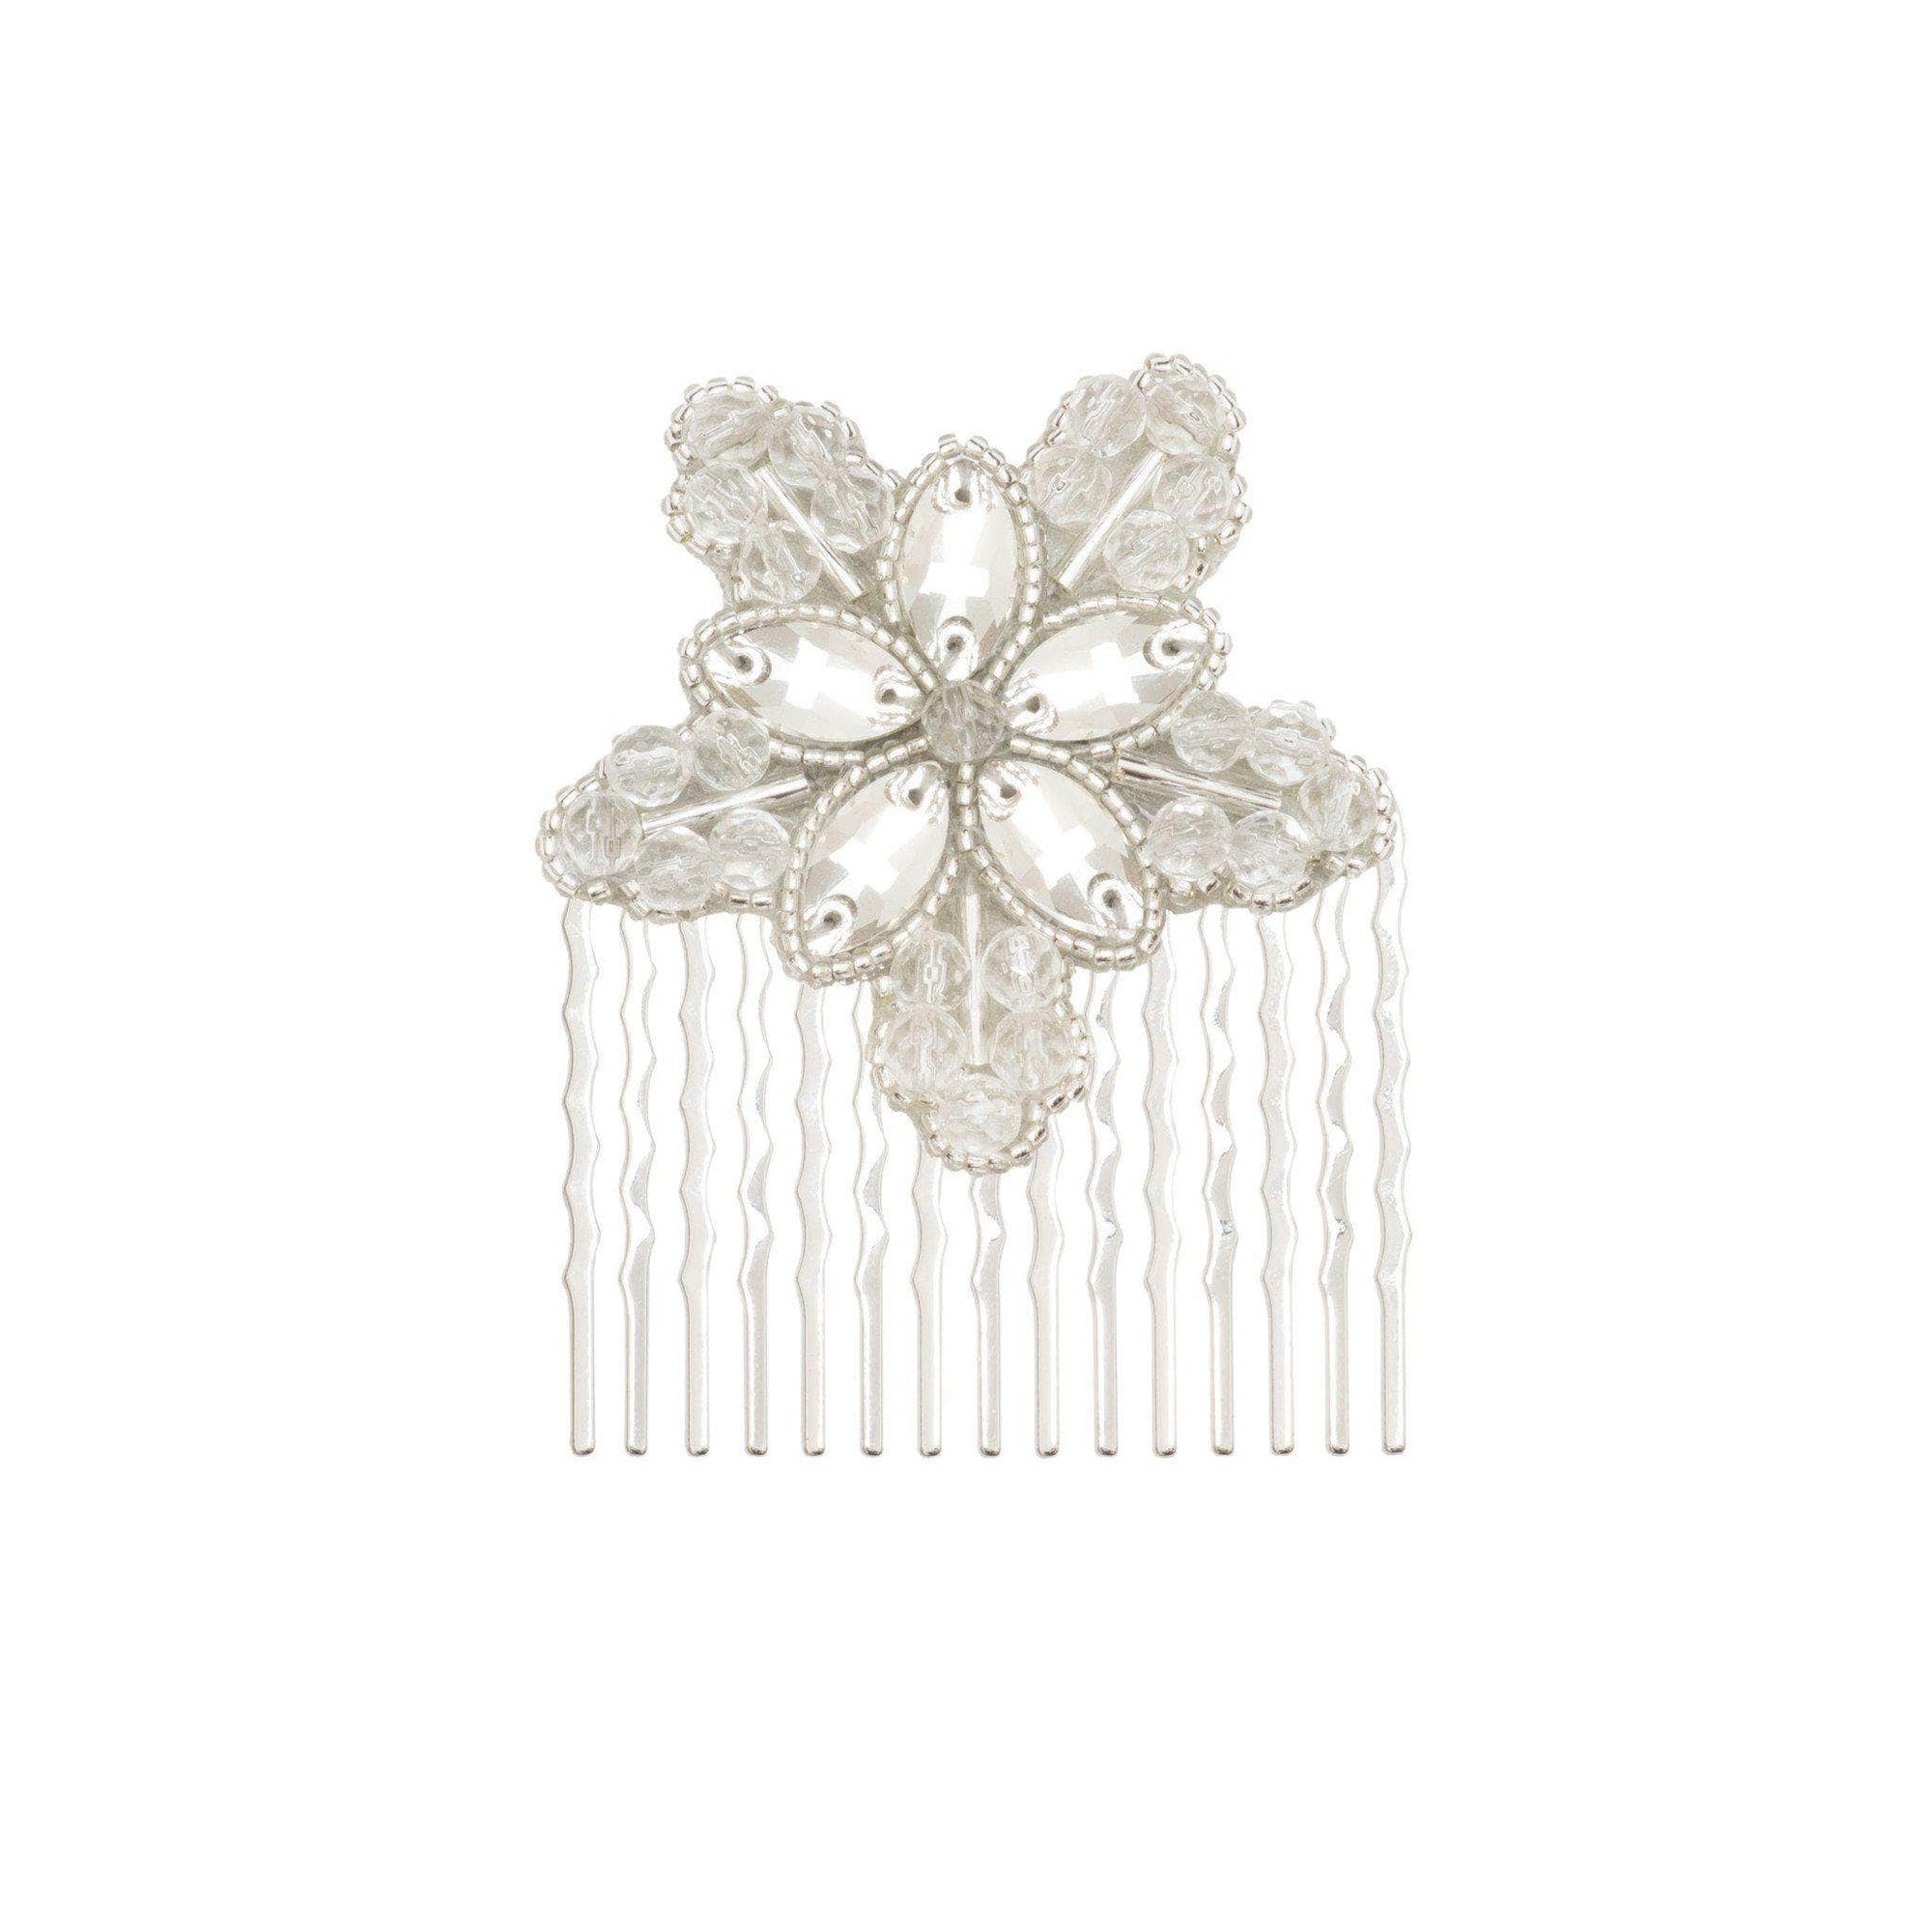 Wedding Haircomb Silver Wedding hair comb with large and small crystals - 'Robyn'